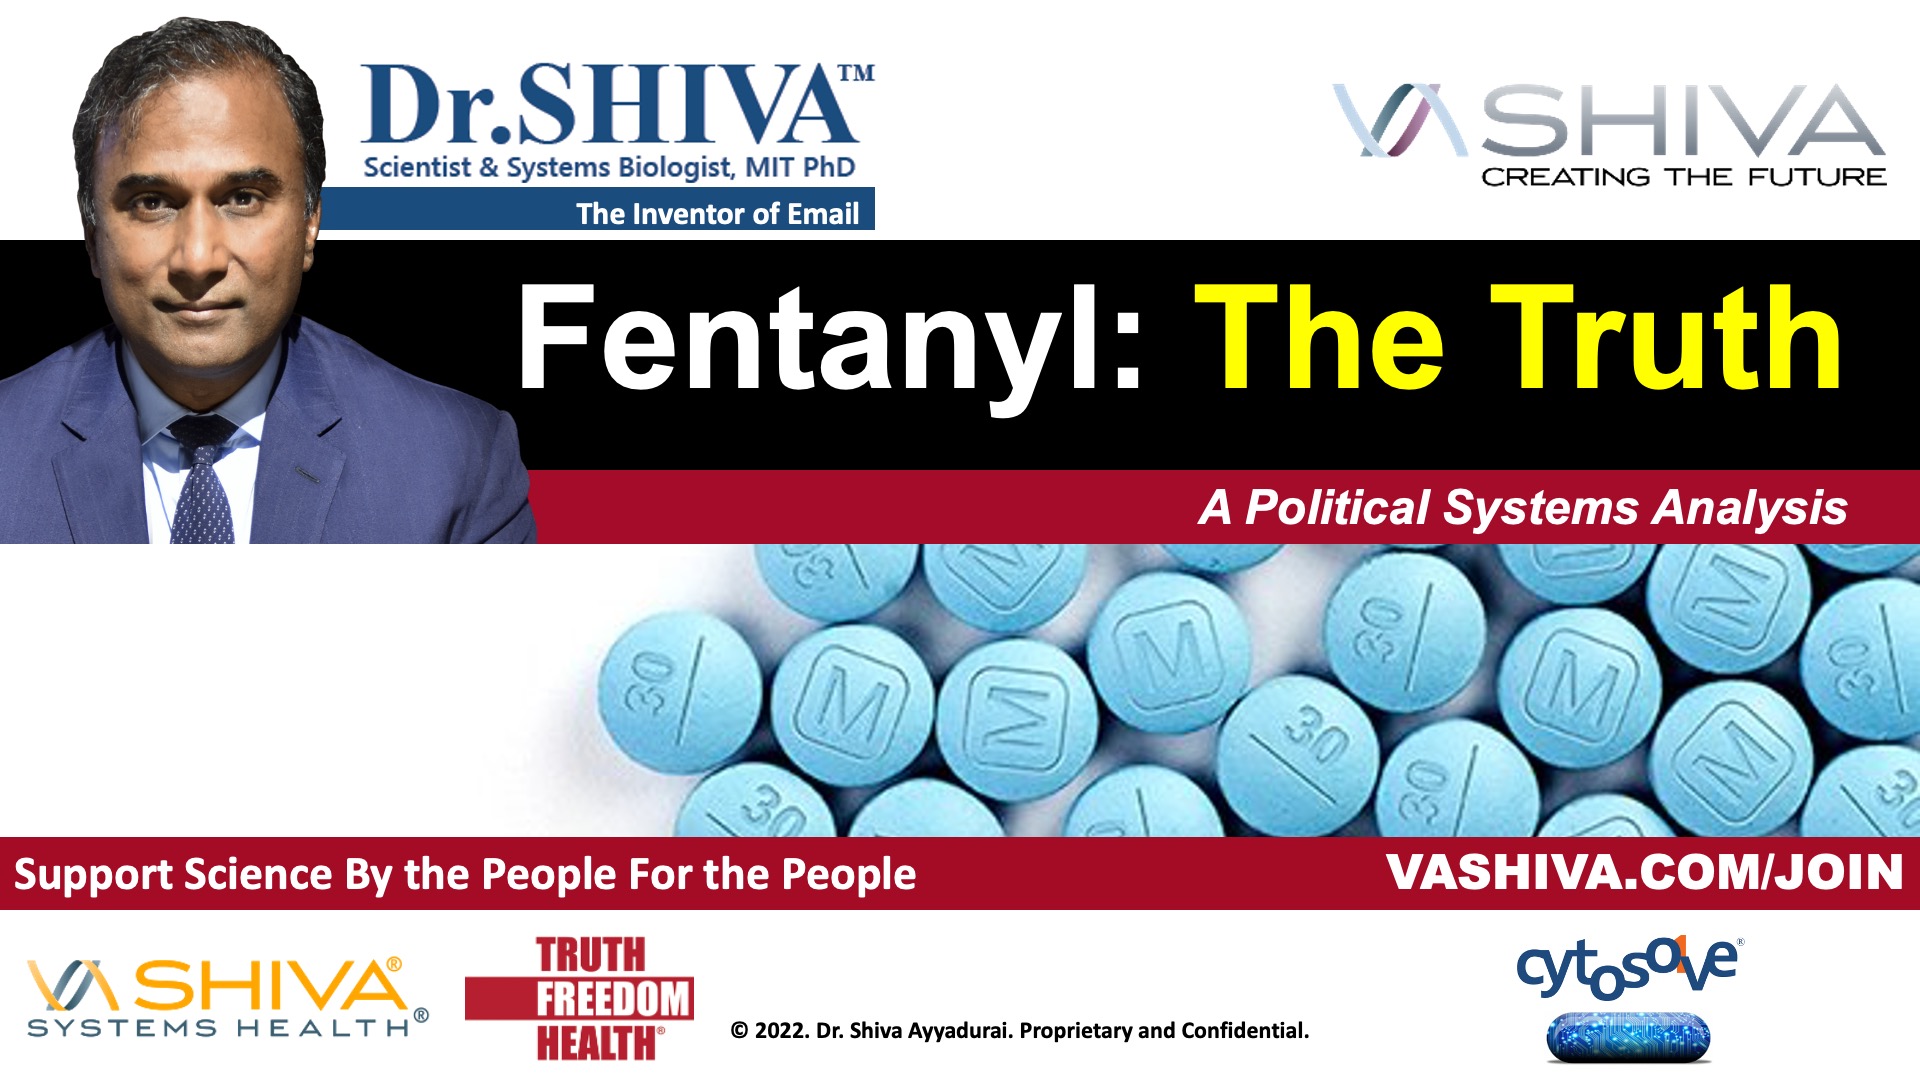 Dr.SHIVA LIVE: Fentanyl - The Truth.